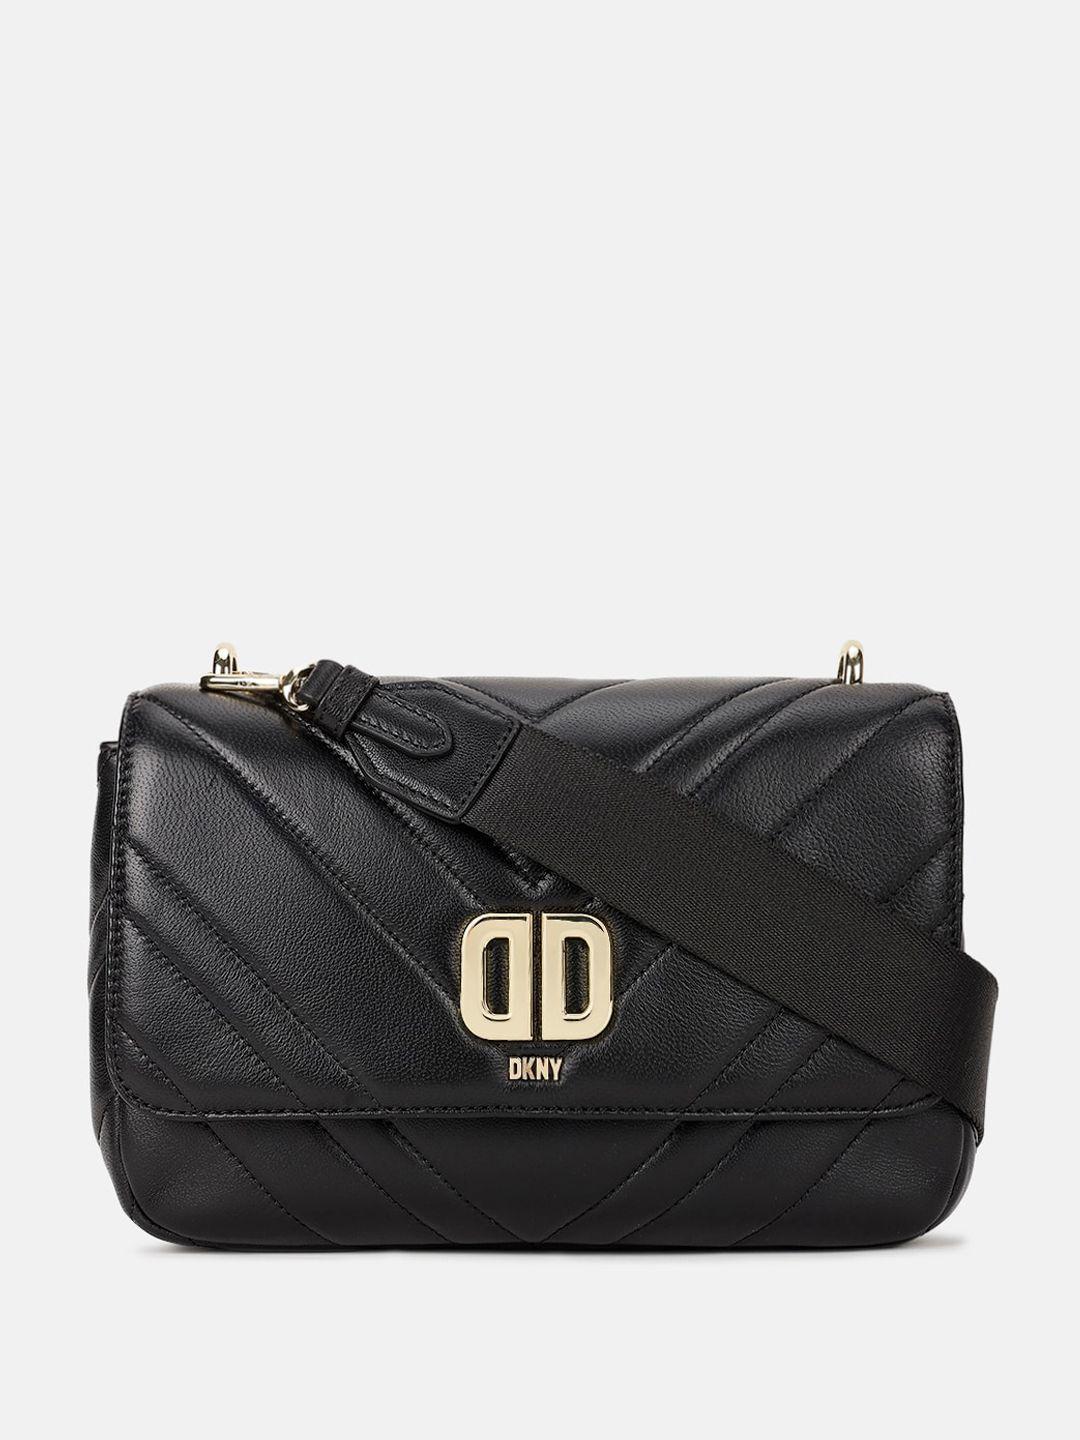 dkny textured leather structured sling bag